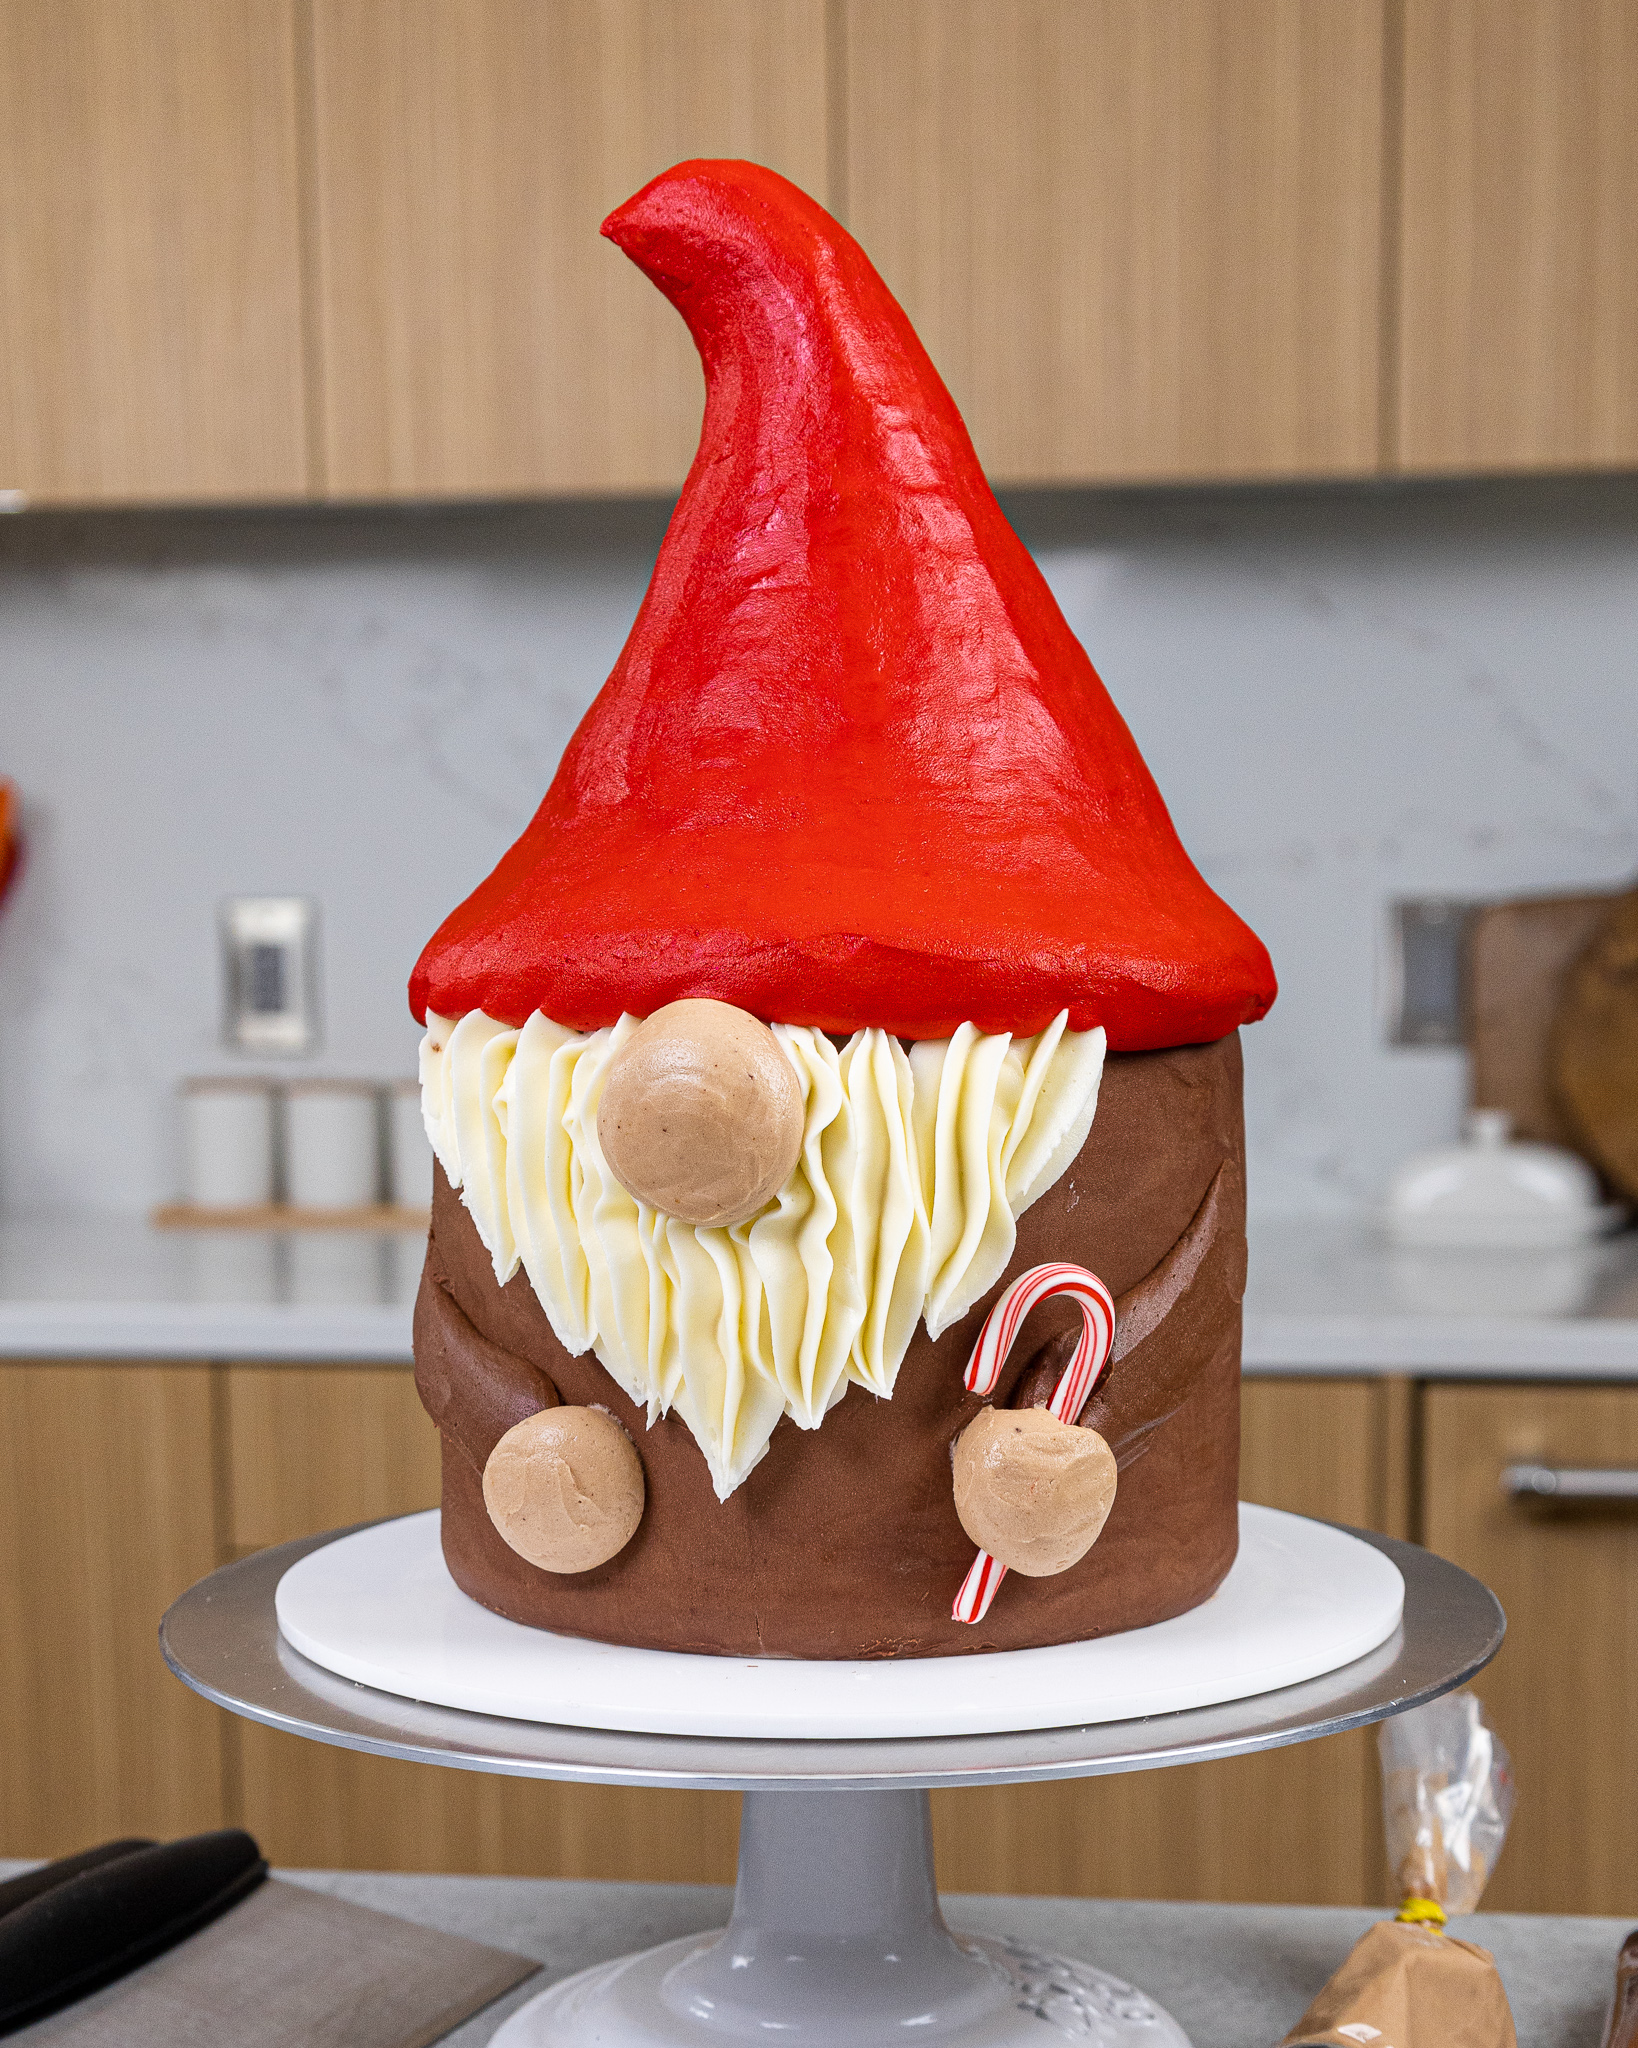 https://chelsweets.com/wp-content/uploads/2021/12/unstaged-finished-gnome-cake-2.jpg